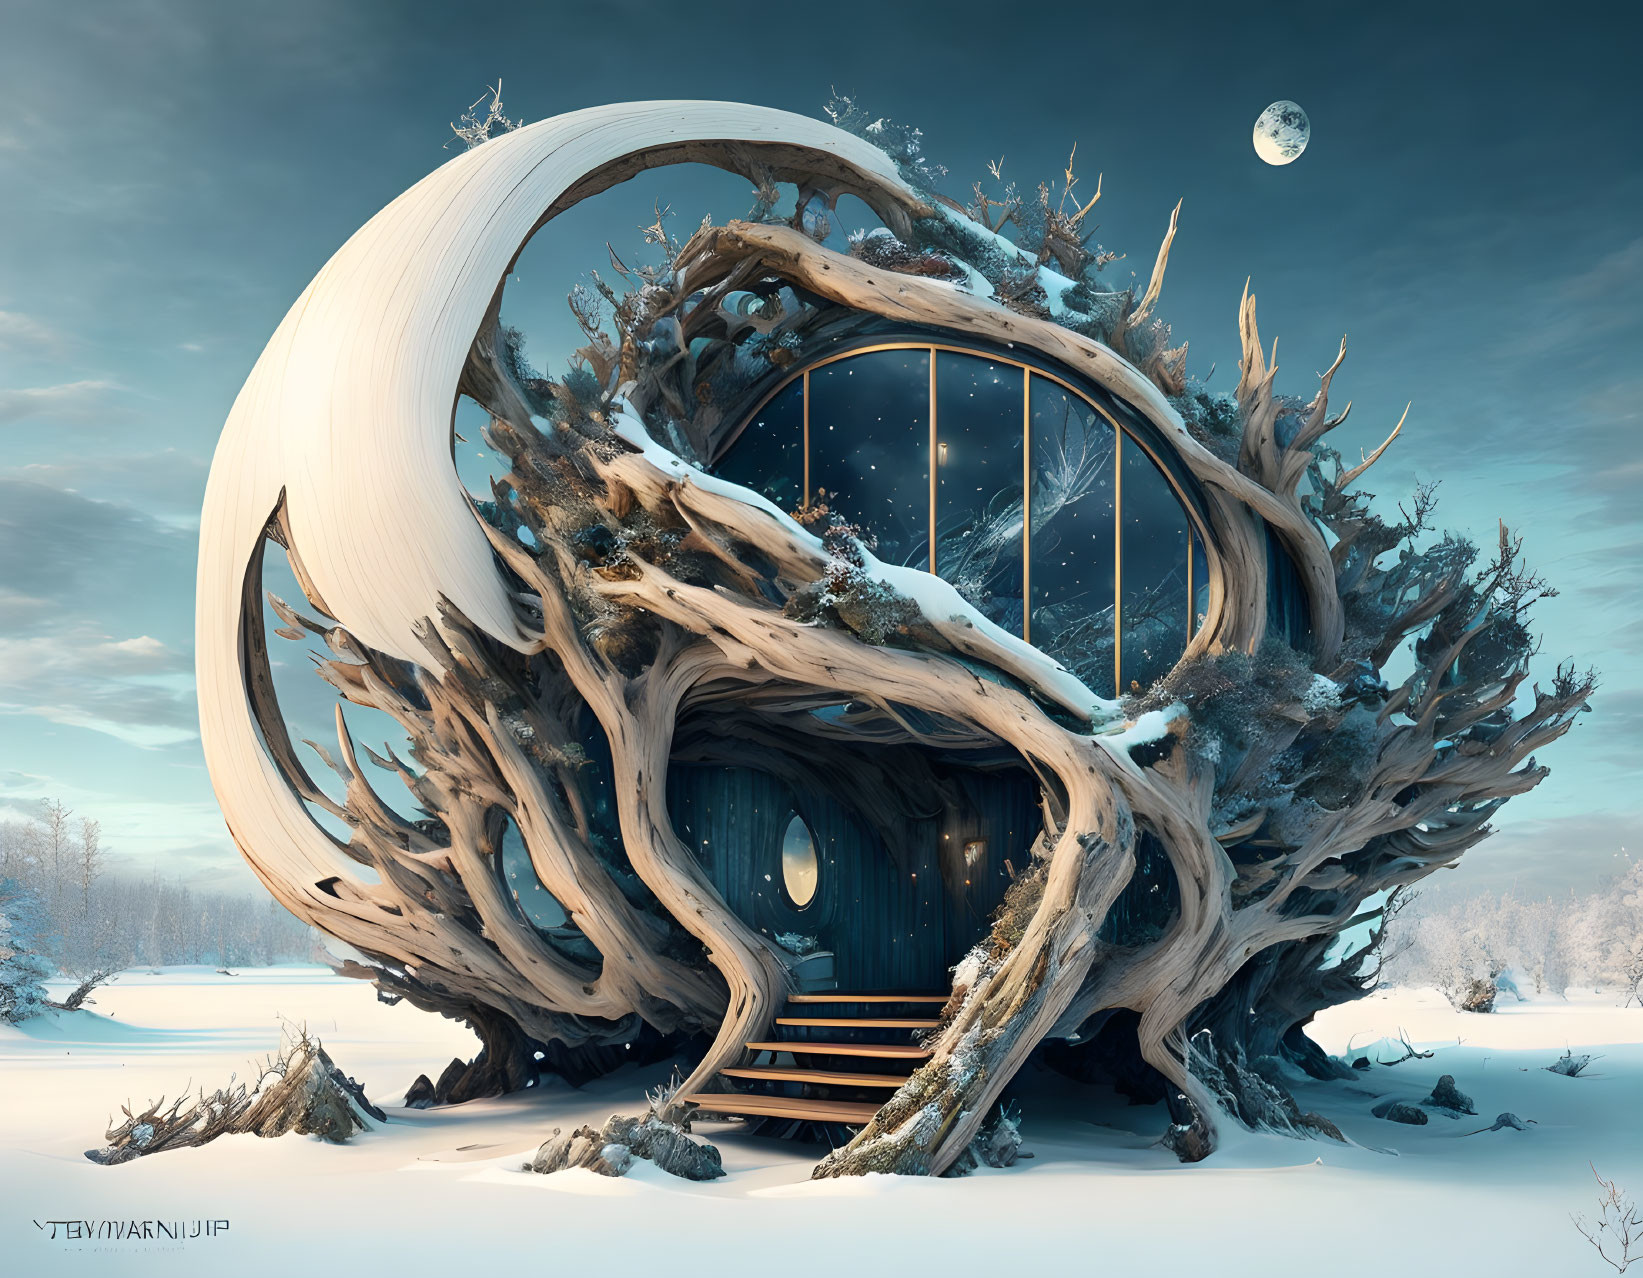 Circular futuristic treehouse with large windows in snowy landscape